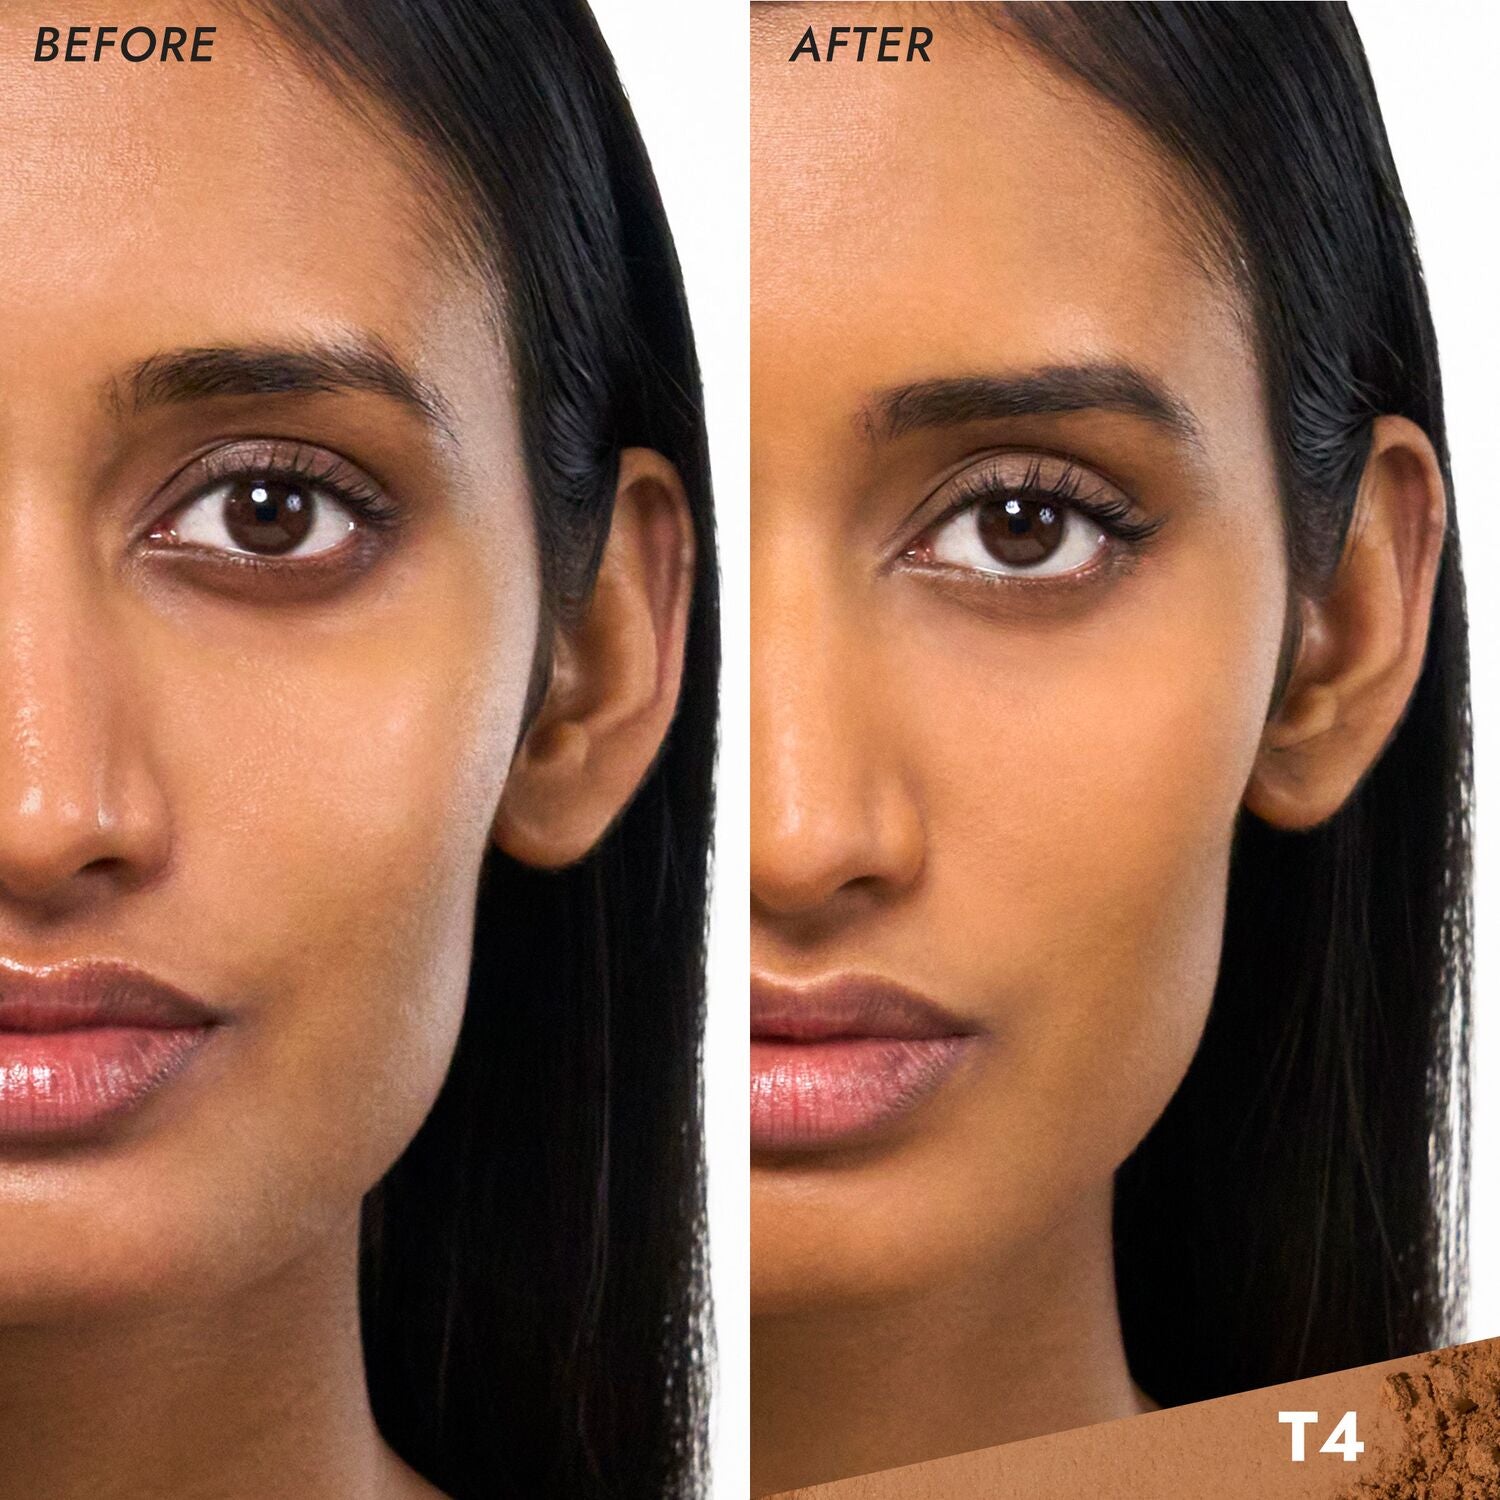 Coverfx Pressed Mineral Foundation model before and after image in shade  T4